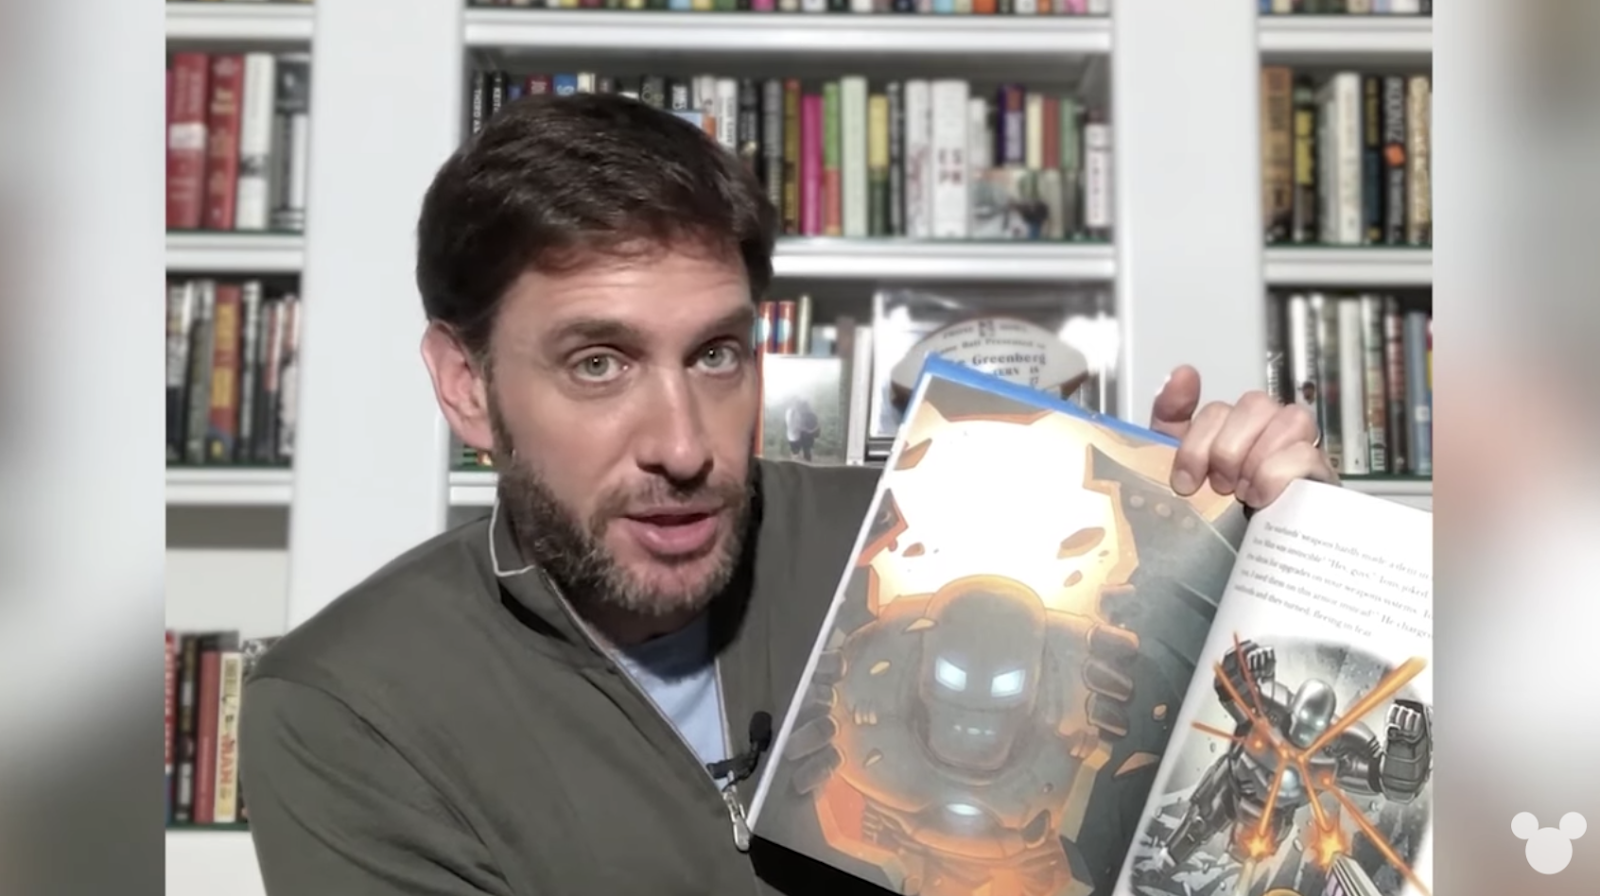 Mike Greenberg Reads an Iron Man Story from "5Minute